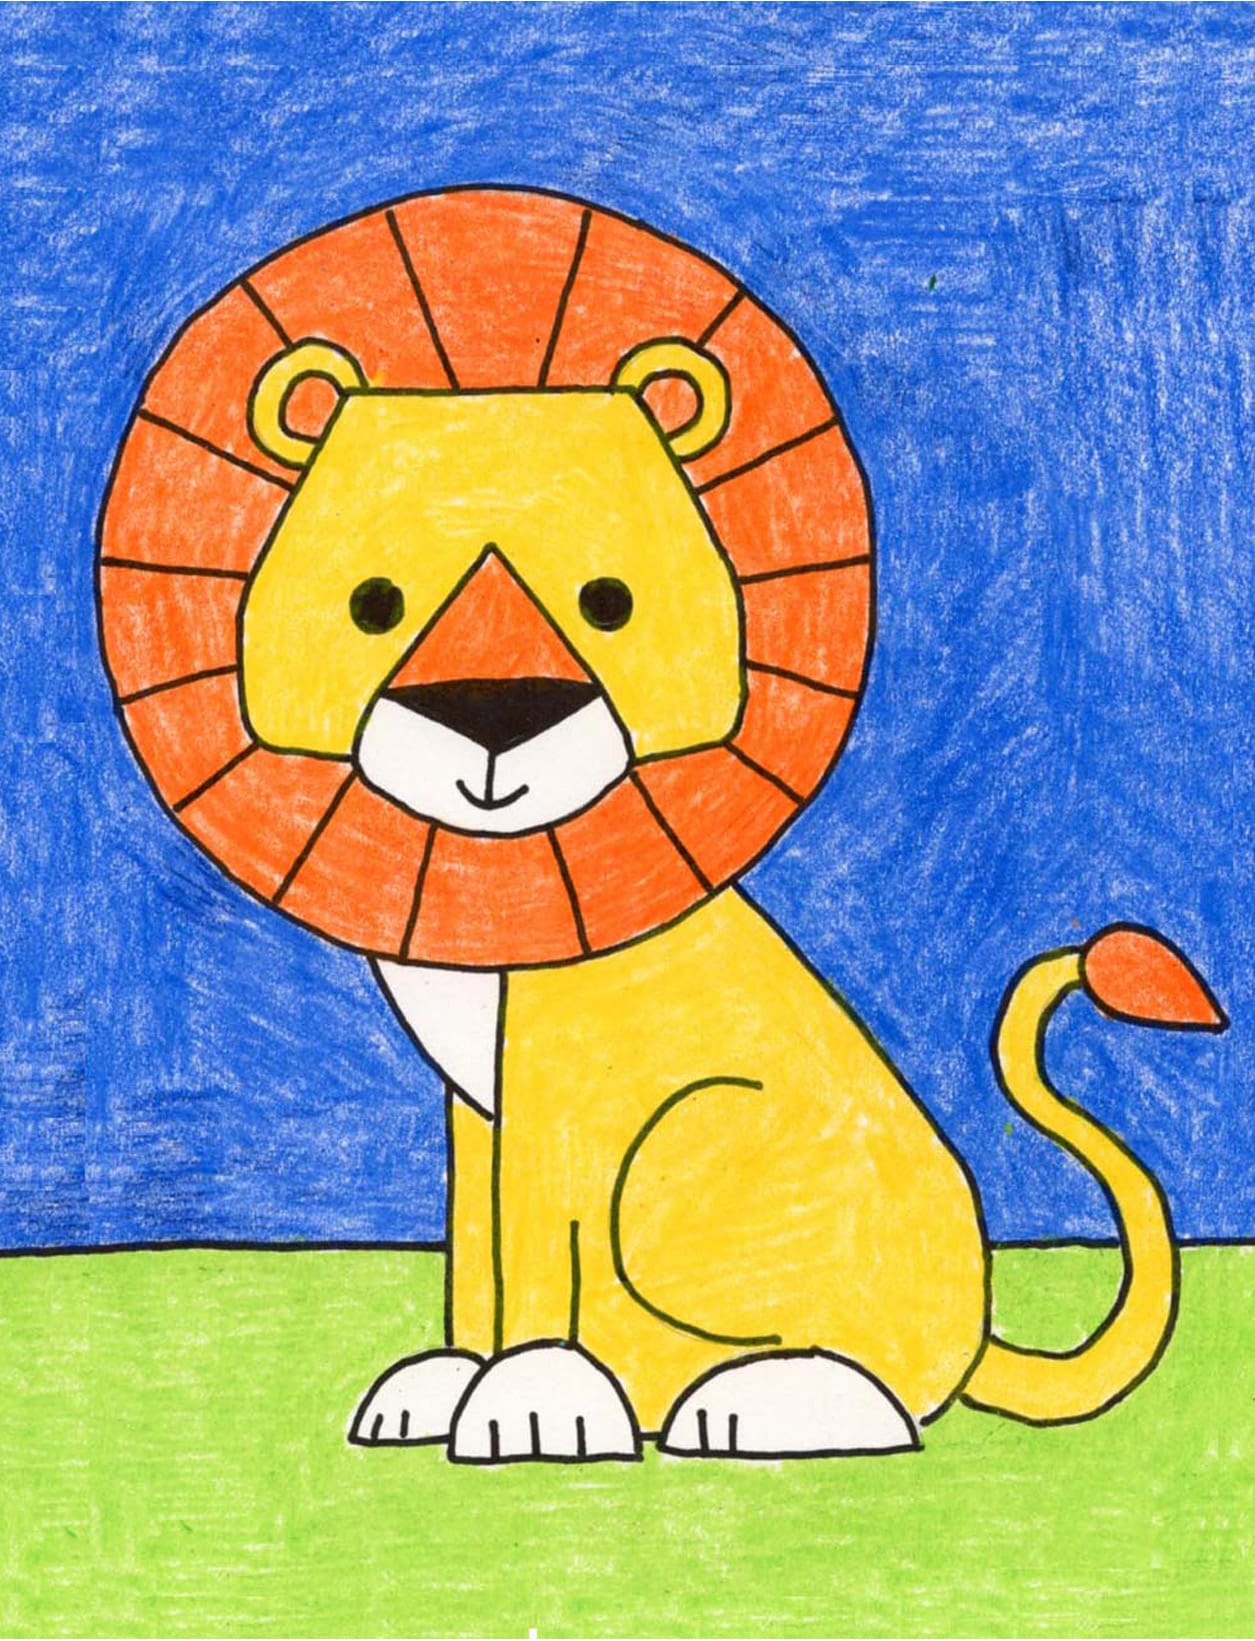 HOW TO DRAW A LION EASY STEP BY STEP FOR KIDS | COLOUR THE LION PICTURE IN  SIMPLE STEPS - YouTube